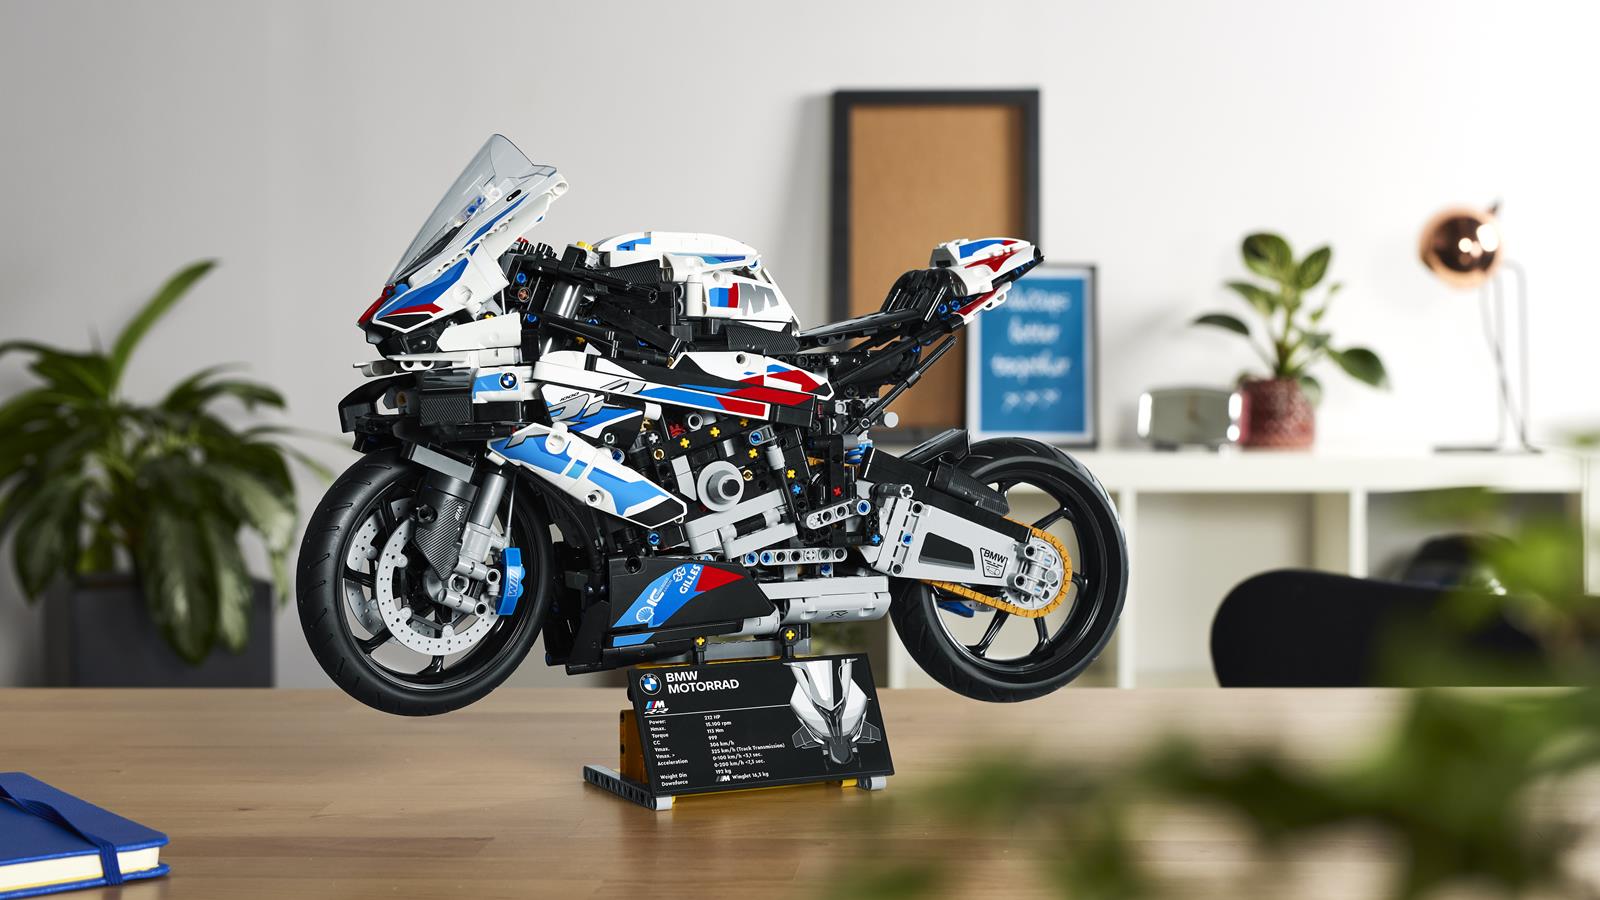 This is LEGO Technic BMW M 1000 RR, a LEGO set for fans of superbikes